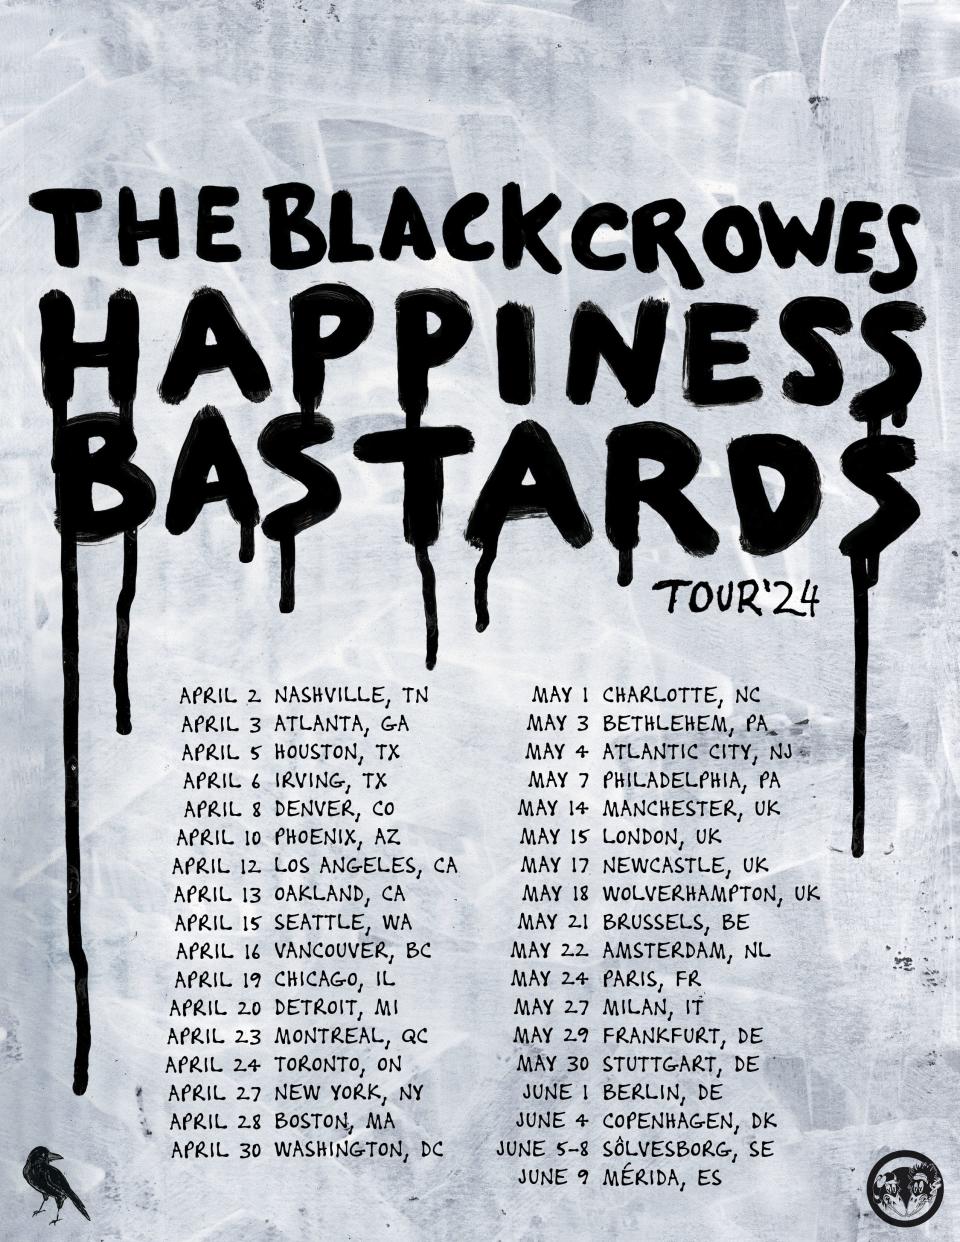 The Black Crowes are embarking on a 35-date "Happiness Bastards" tour.